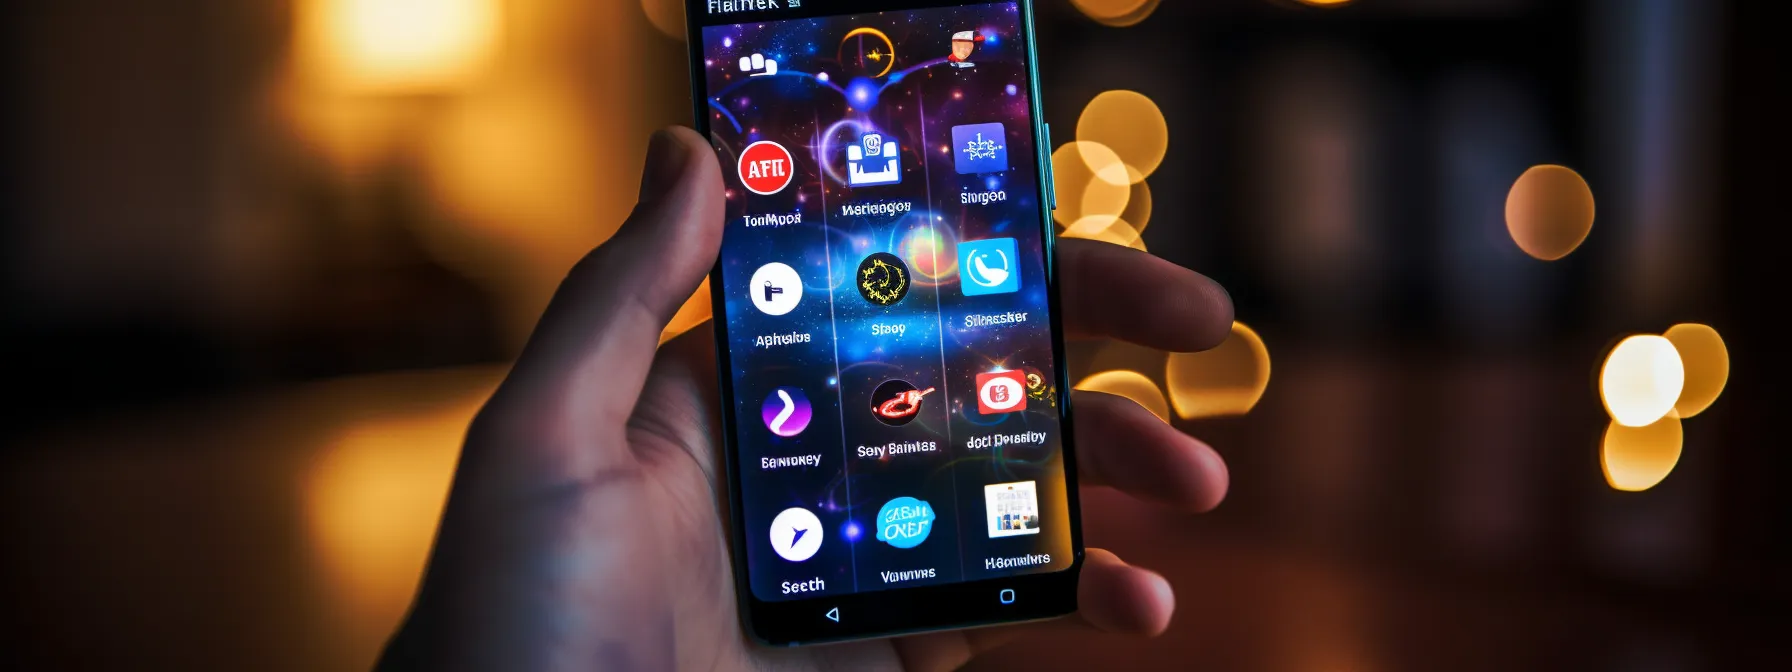 a person holding a smartphone with various social media icons visible on the screen.